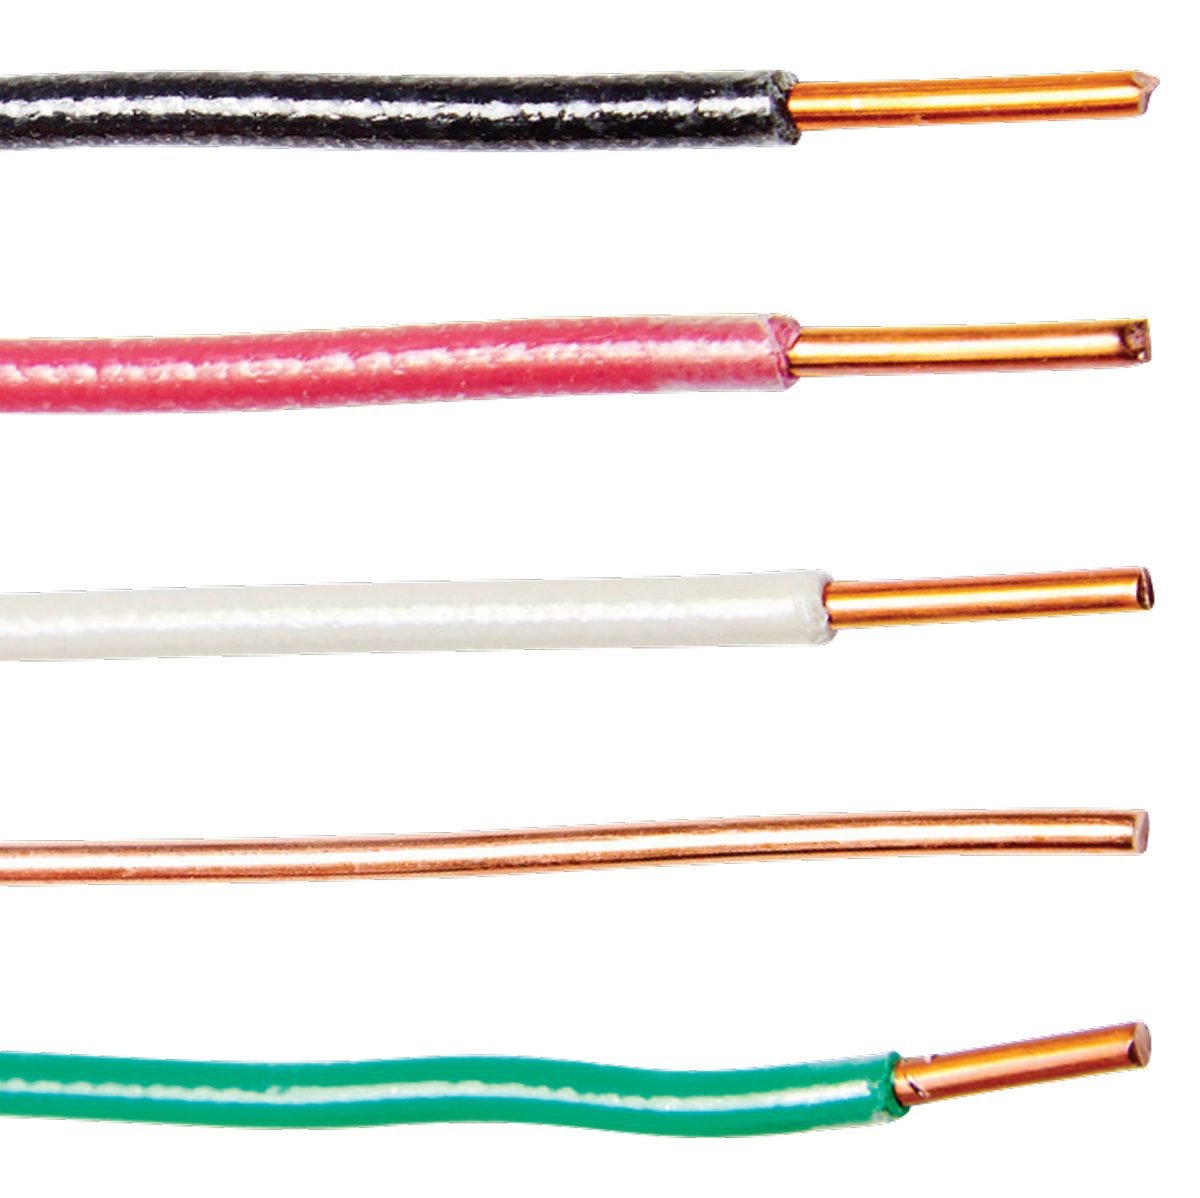 Electircal Wire Colors: The Basics